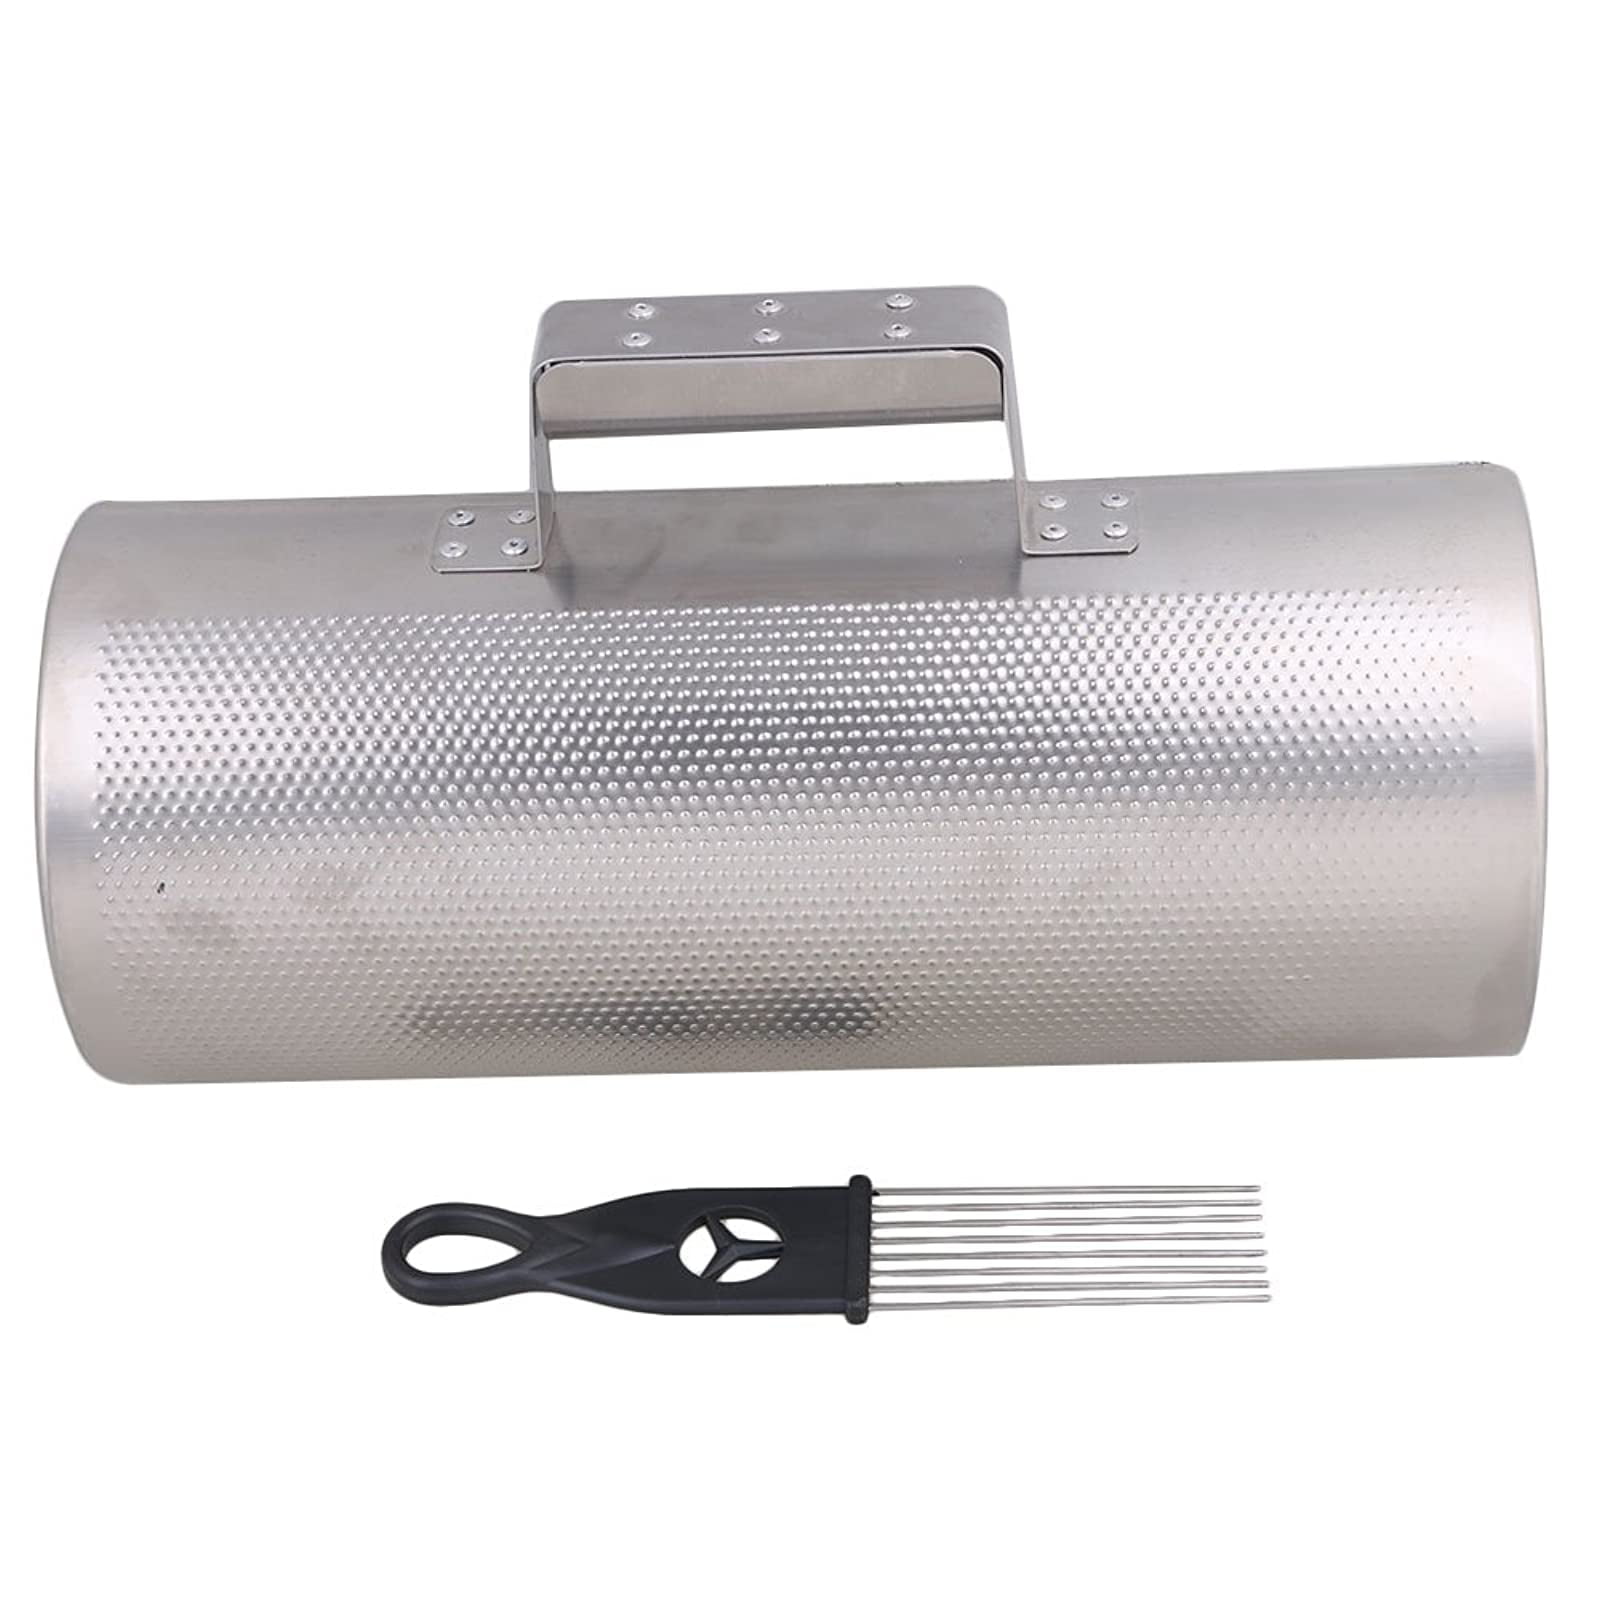 Yibuy 15x3.15inch Silver Stainless Steel Guiro with Scraper Musical Percussion Toy